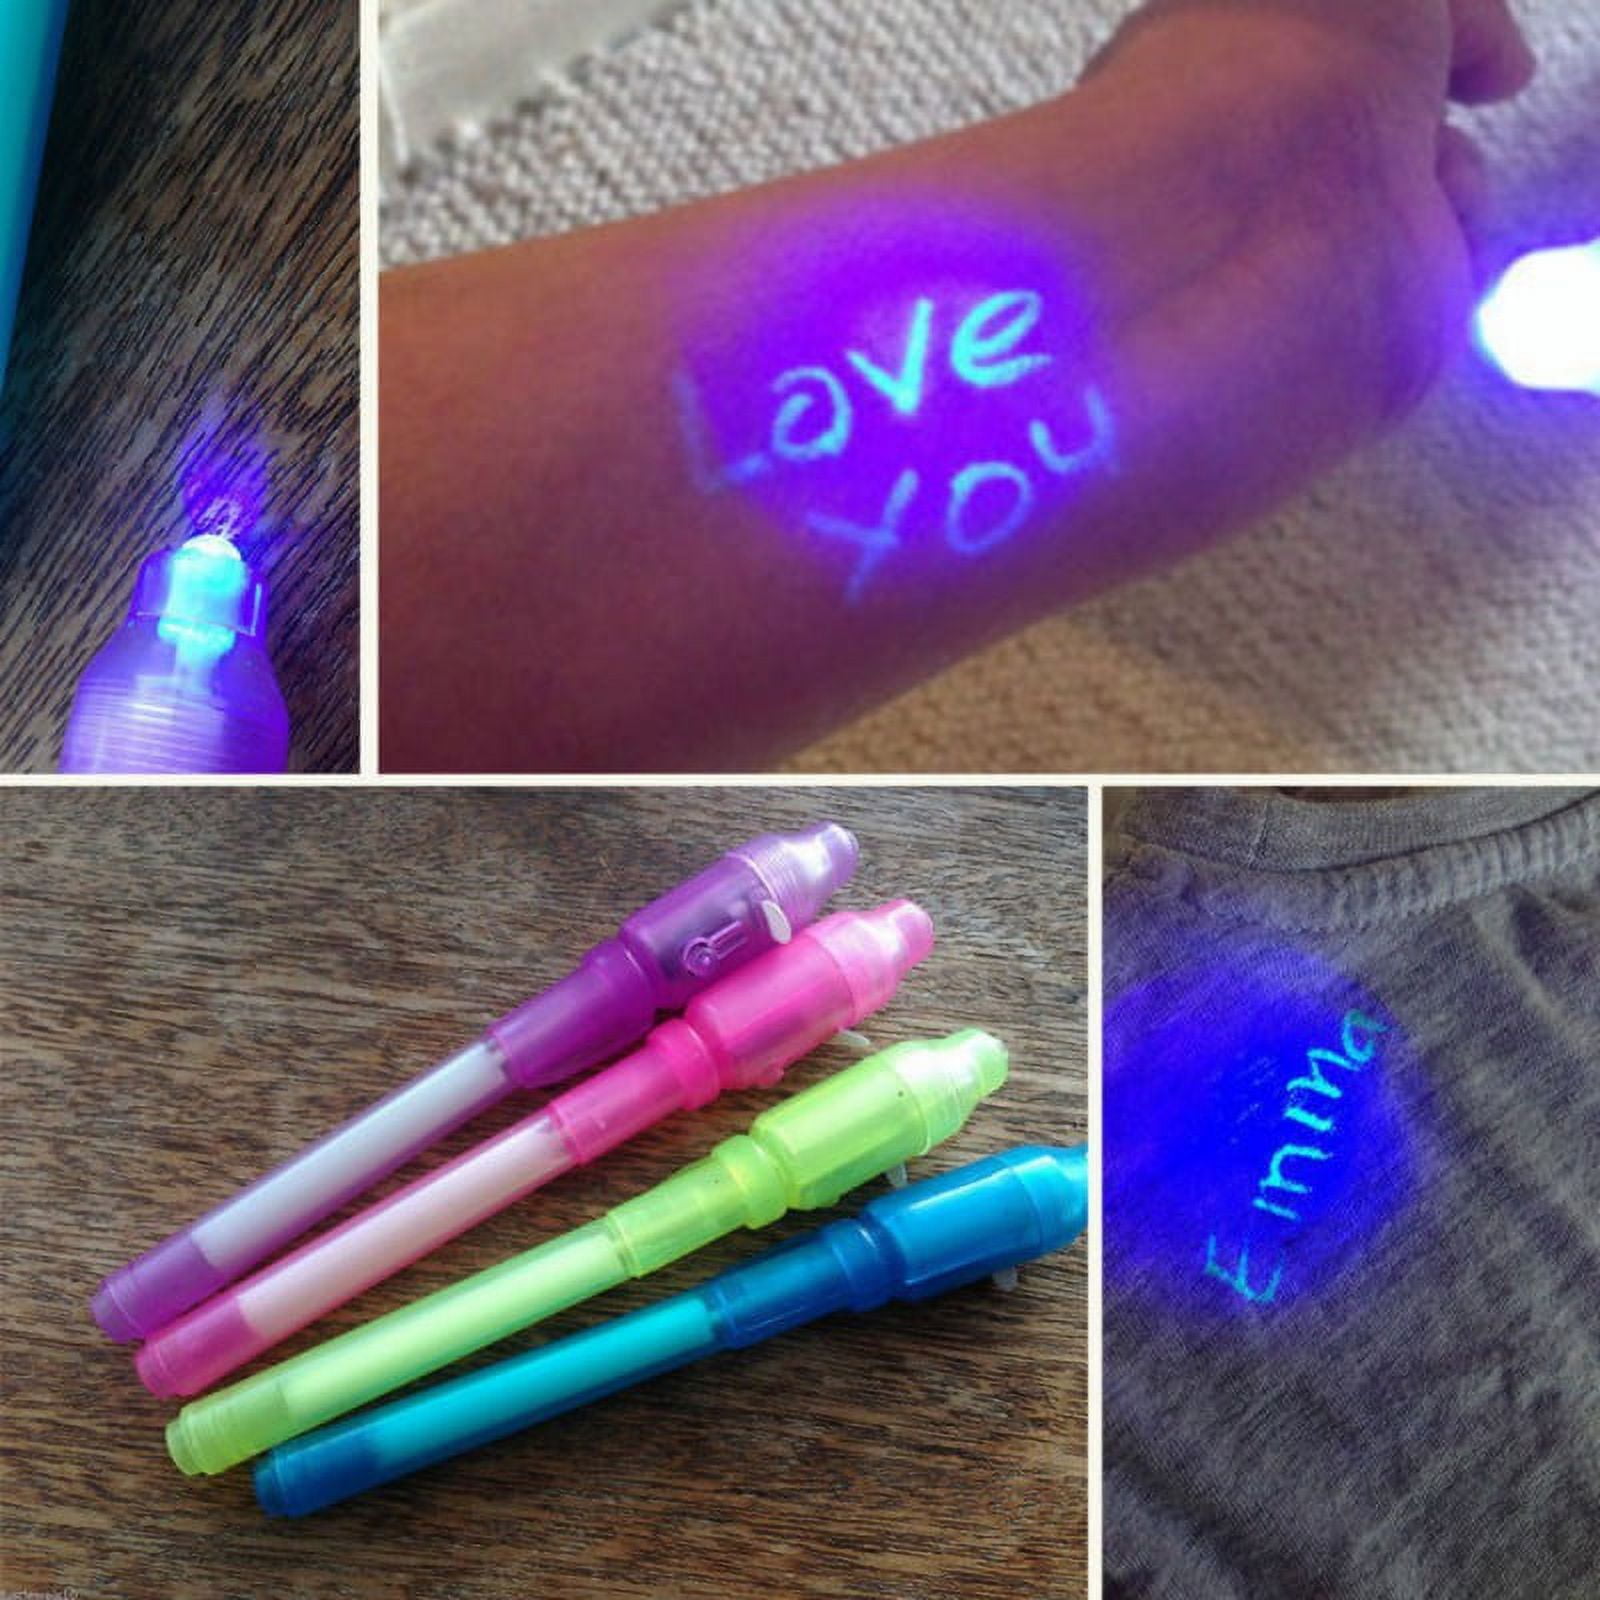 Atopoler 4Pack Invisible Ink Pen with UV Black Light Secret Spy Pens Magic  Disappearing Ink Markers Classroom Supplies Kids Party Favors Valentines